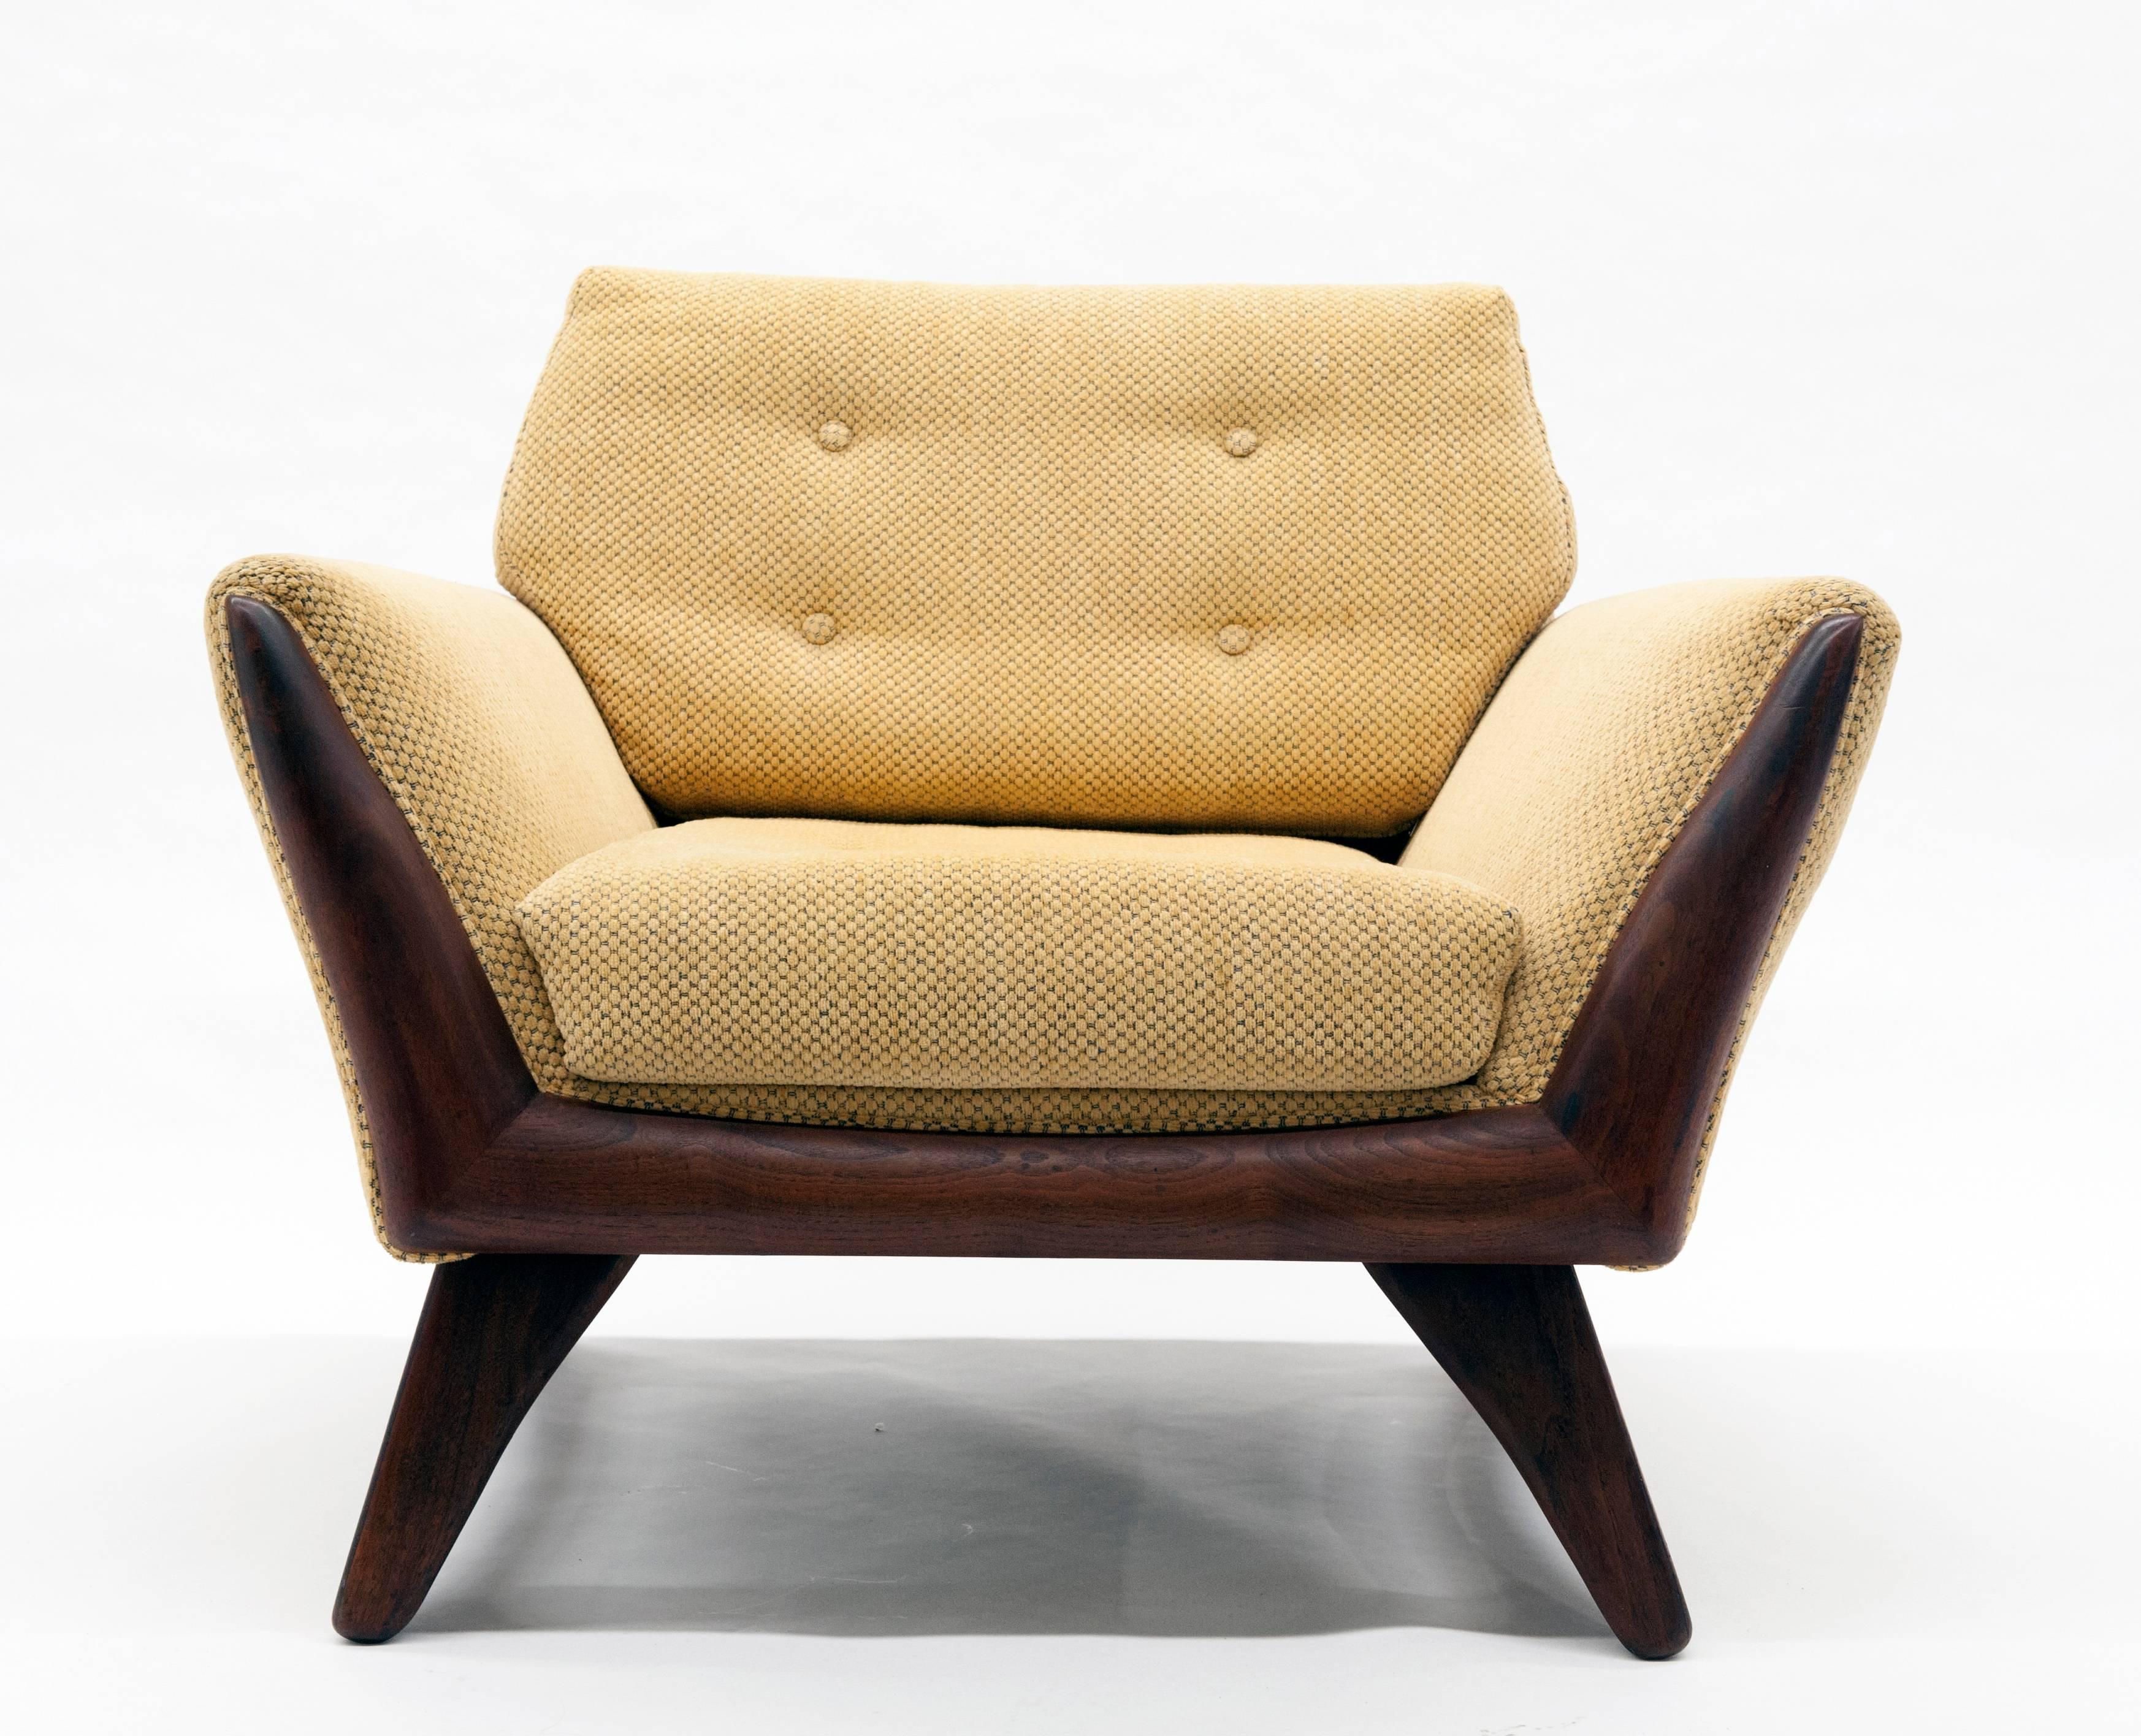 Upholstery Adrian Pearsall Sculptural Lounge Chair